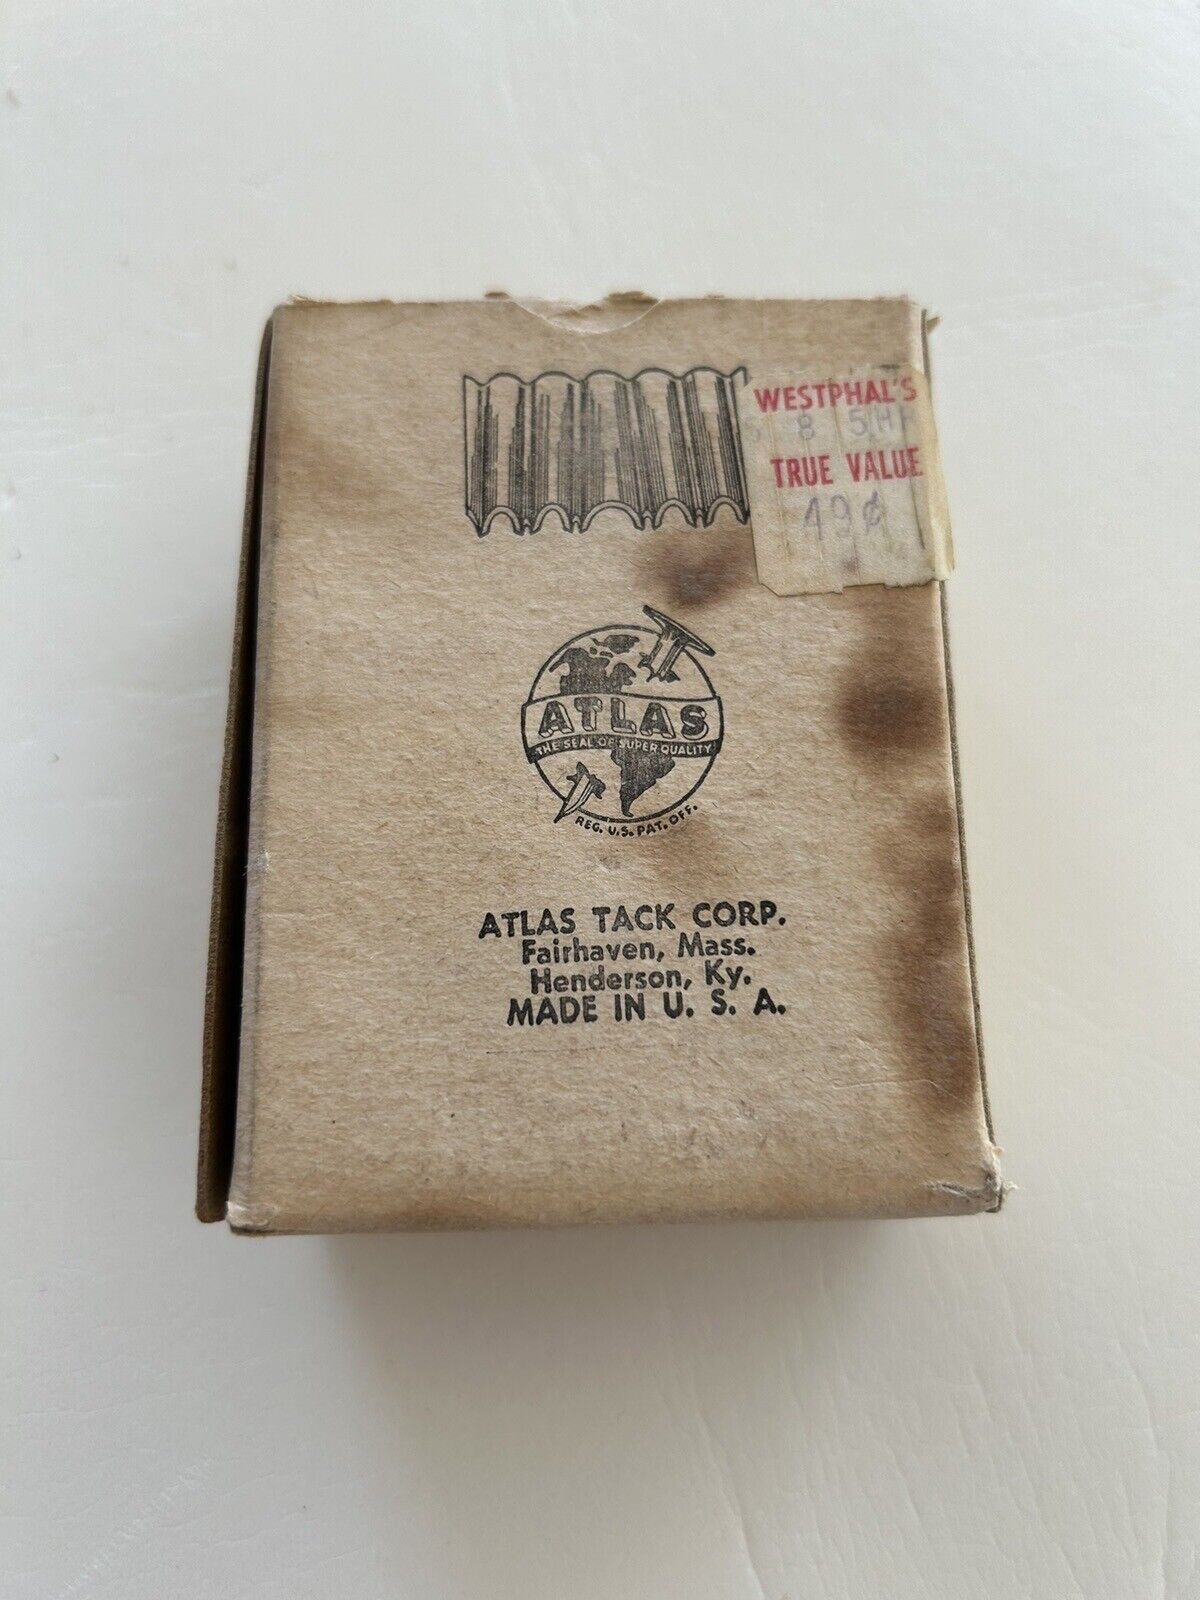 Vintage ATLAS Tack Corp. No.5 Corrugated Fasteners 5/8 - Qty: 60